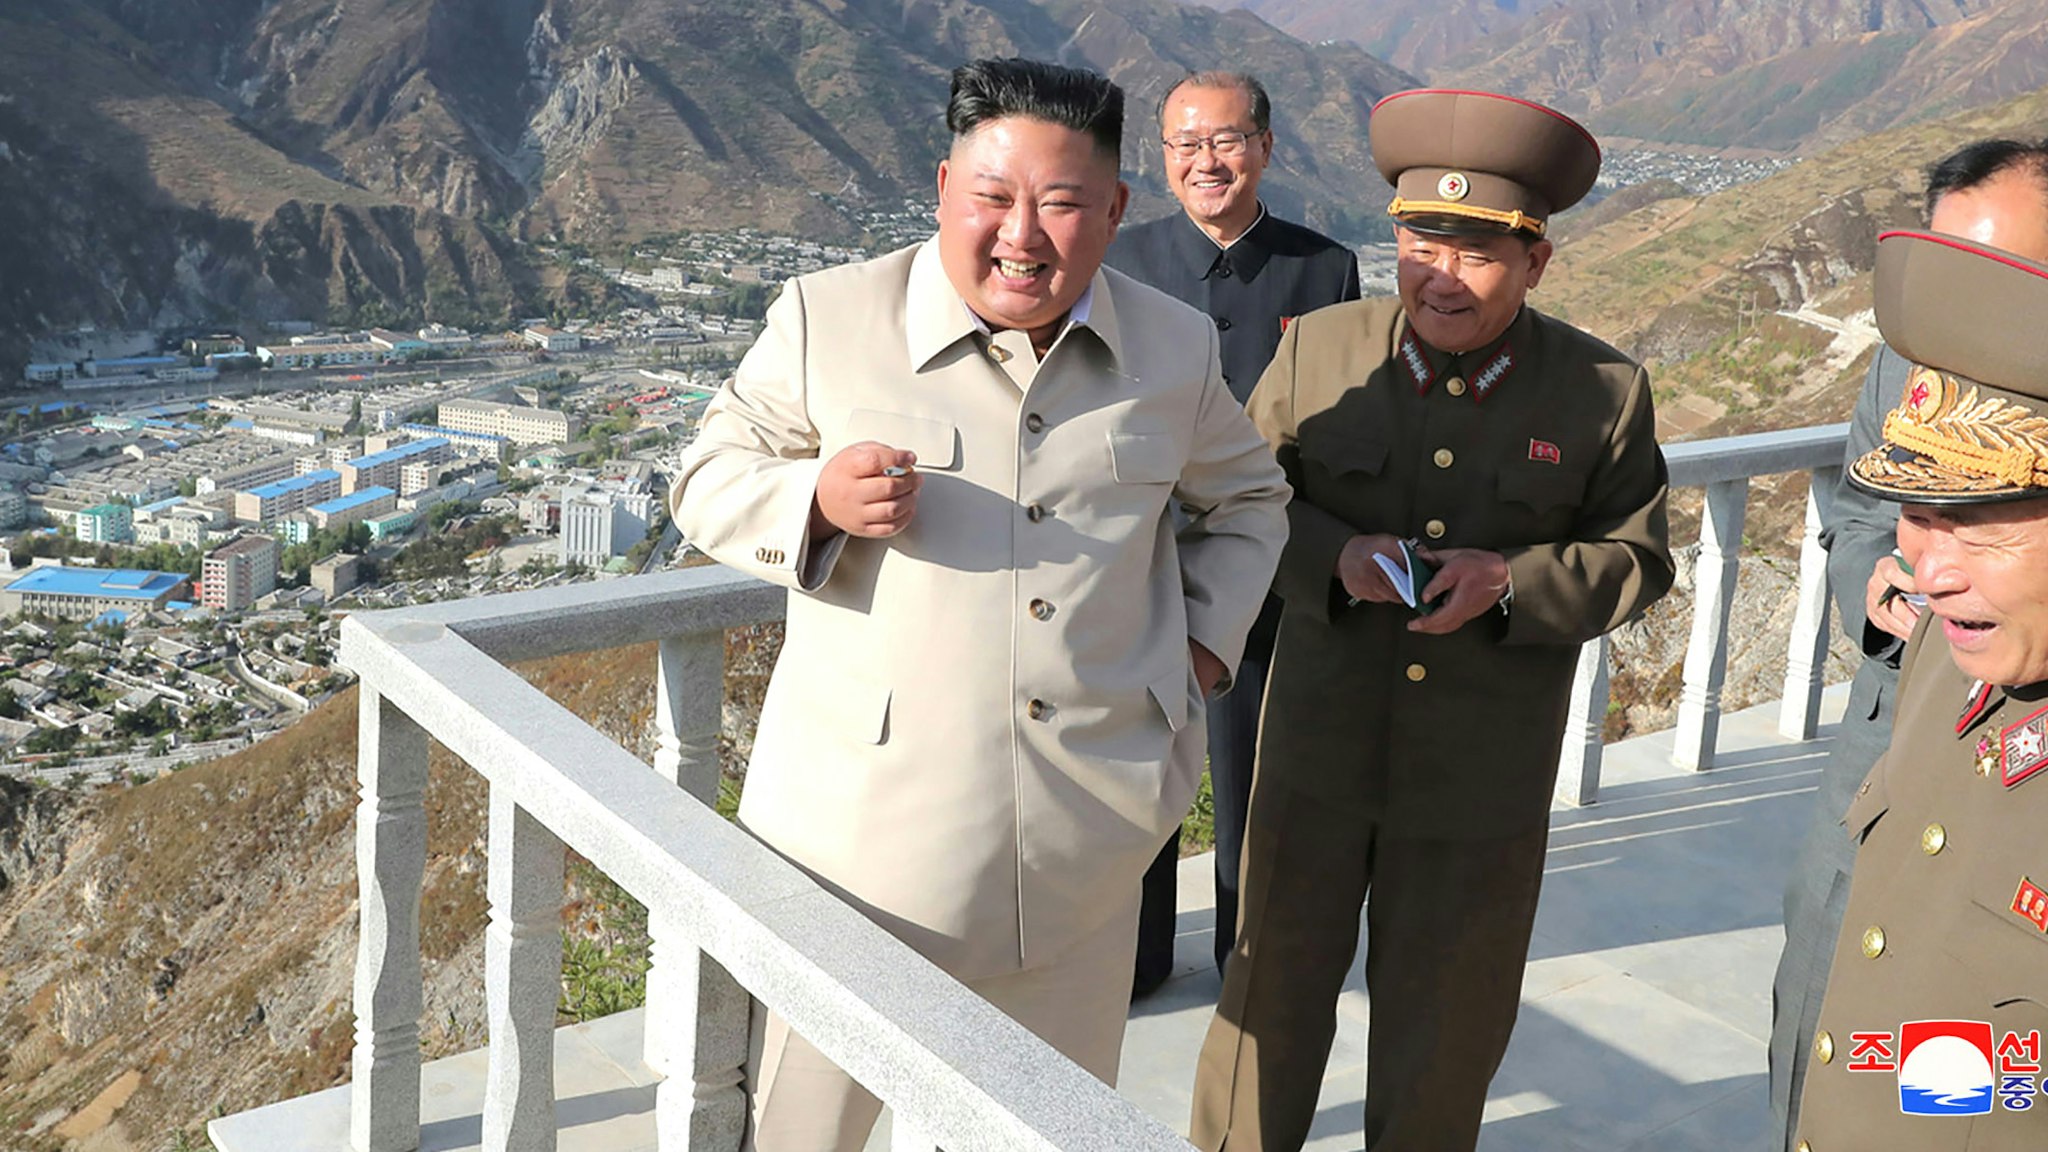 This undated picture released from North Korea's official Korean Central News Agency (KCNA) on October 14, 2020 shows North Korean leader Kim Jong Un (L) inspecting the rehabilitation site in the Komdok area of South Hamgyong Province, which was damaged by the typhoon.